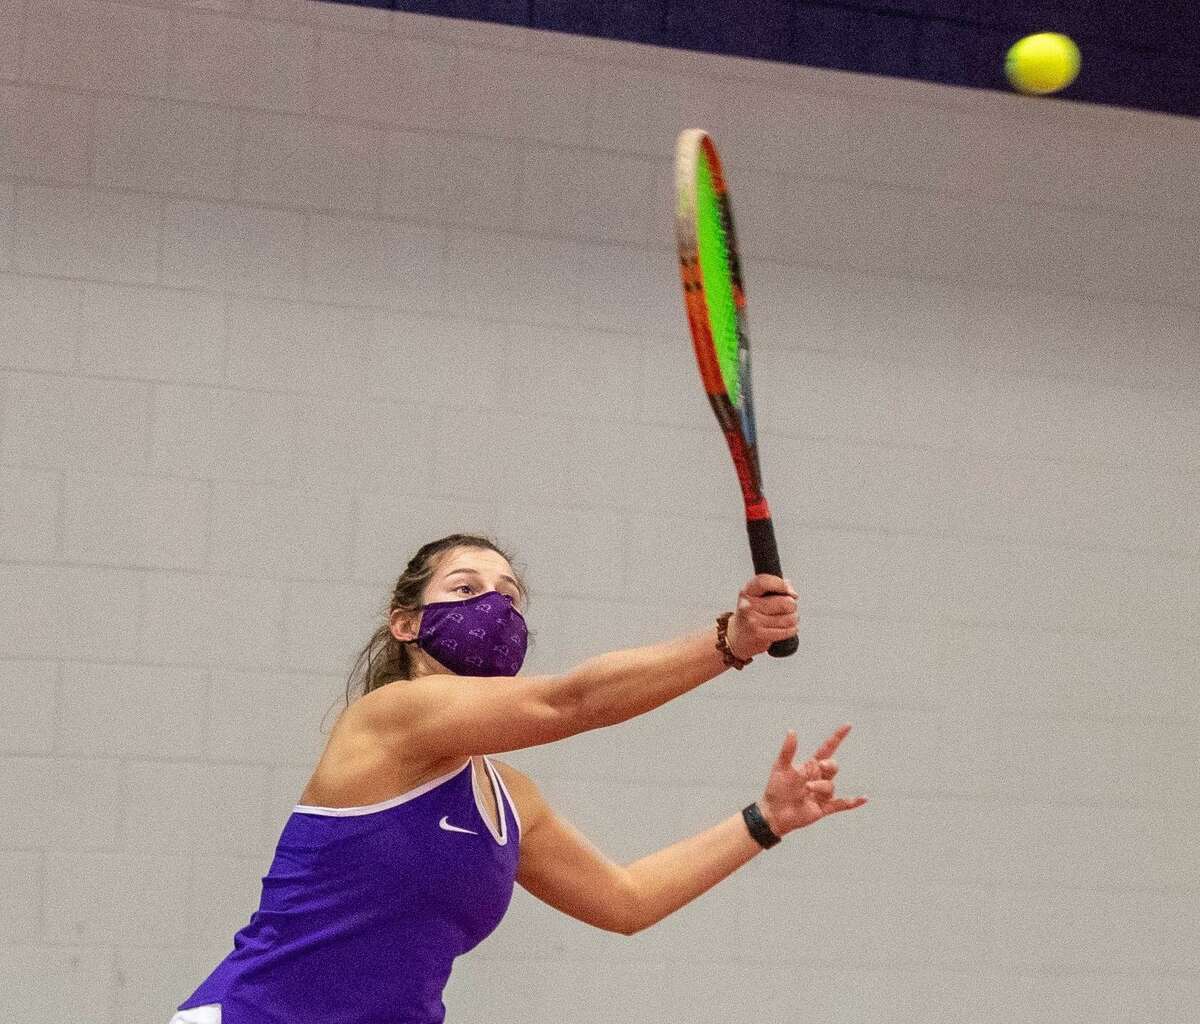 Zoe Rogers is in her first season playing tennis at St. Michael's College.